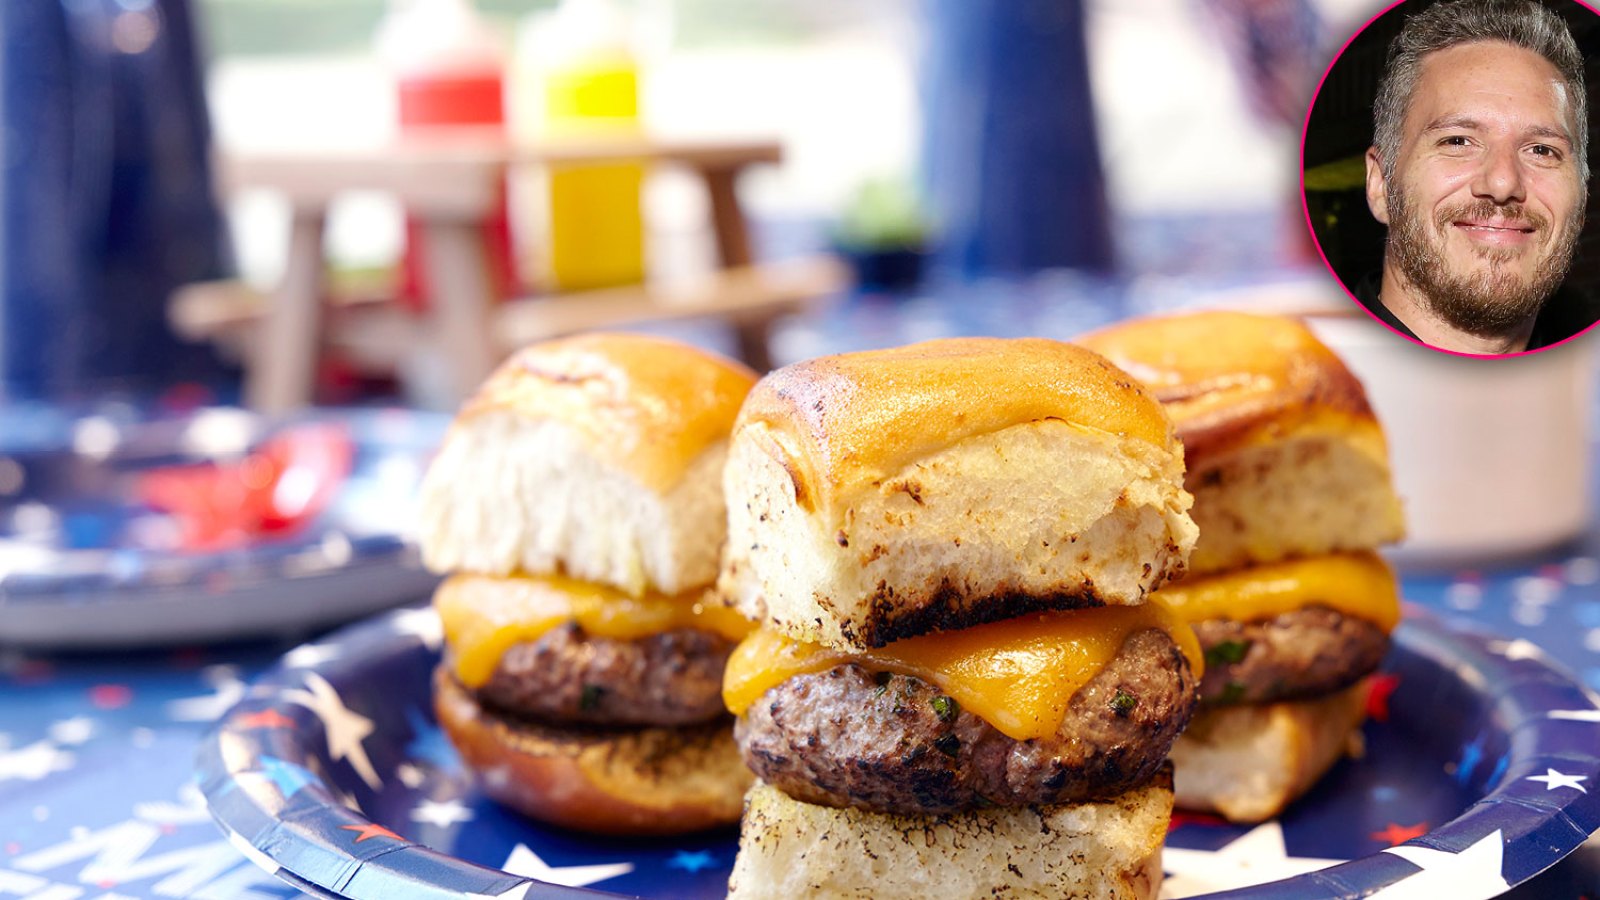 Top Chef's Spike Mendelsohn Shares 'Delicious' July 4th Slider Recipe, Tips for Cooking for Large Groups